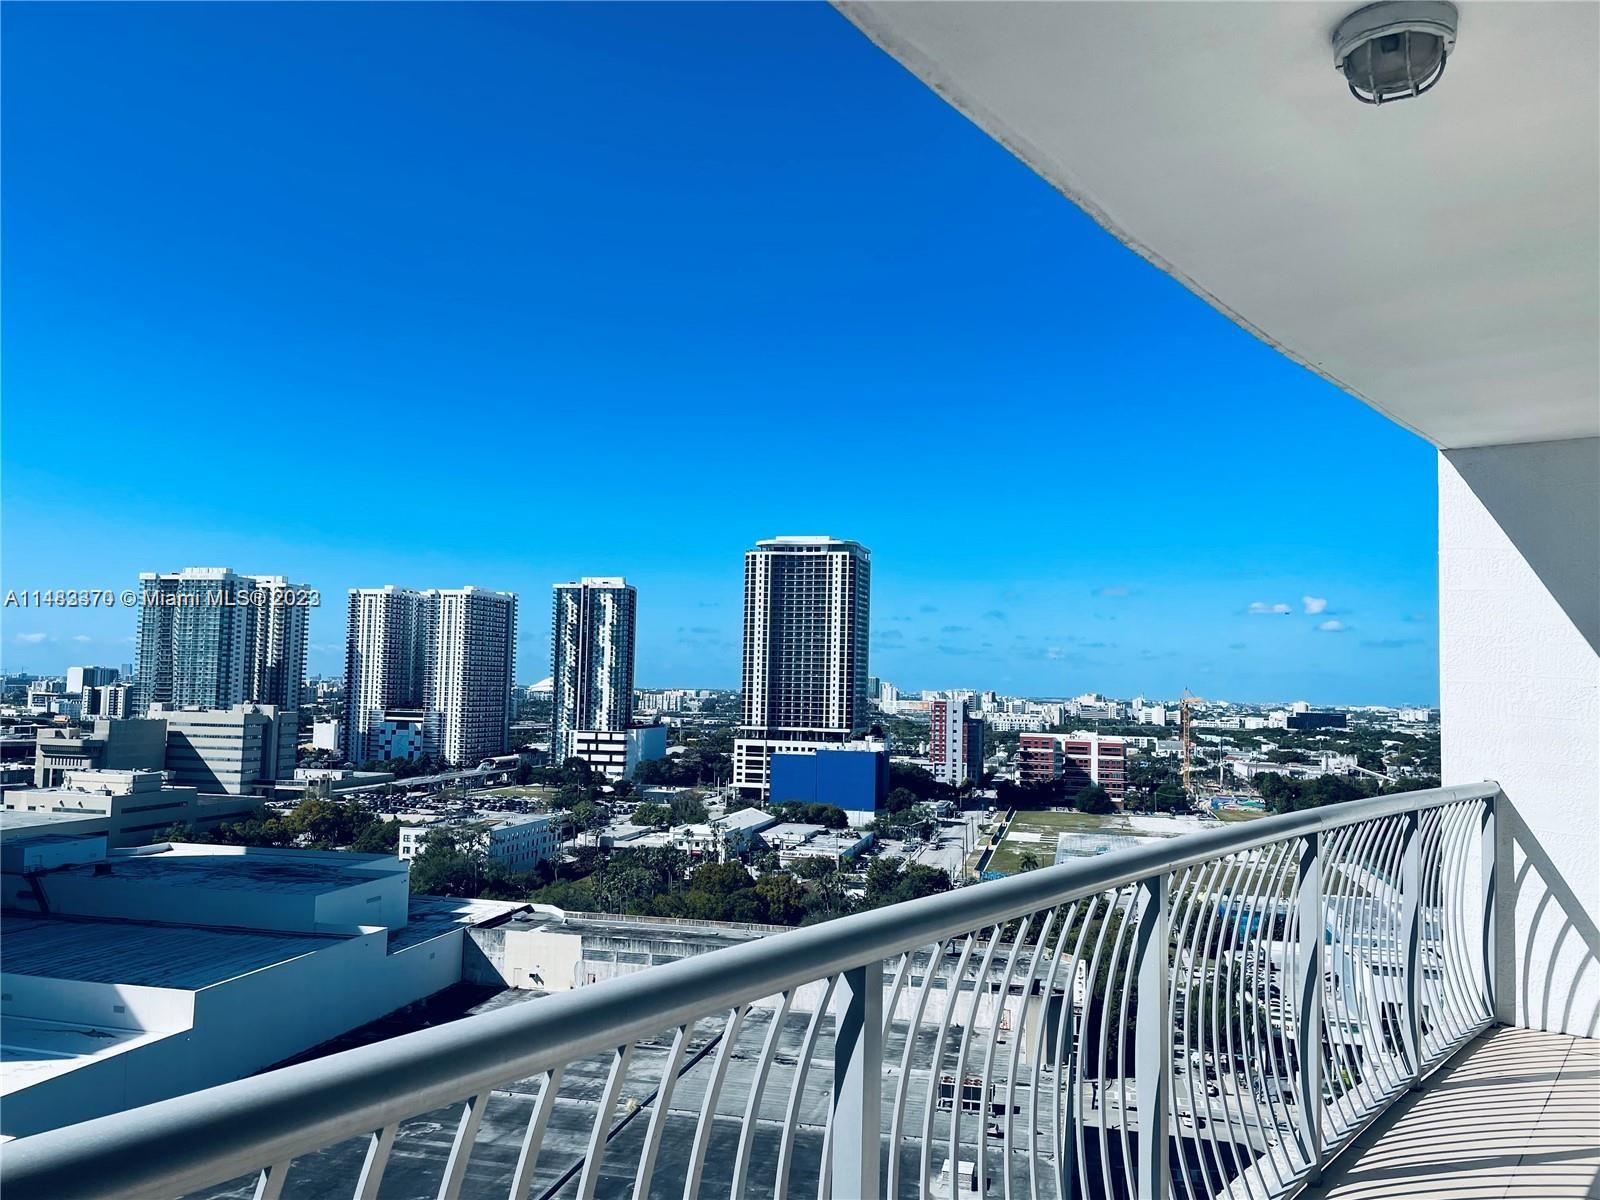 1/1 at Opera Tower At Edgewater Miami. Close to Brickell, Downtown, Wynwood and Midtown. Tile Floors and water view. Tenant Occupied. Good for investors.